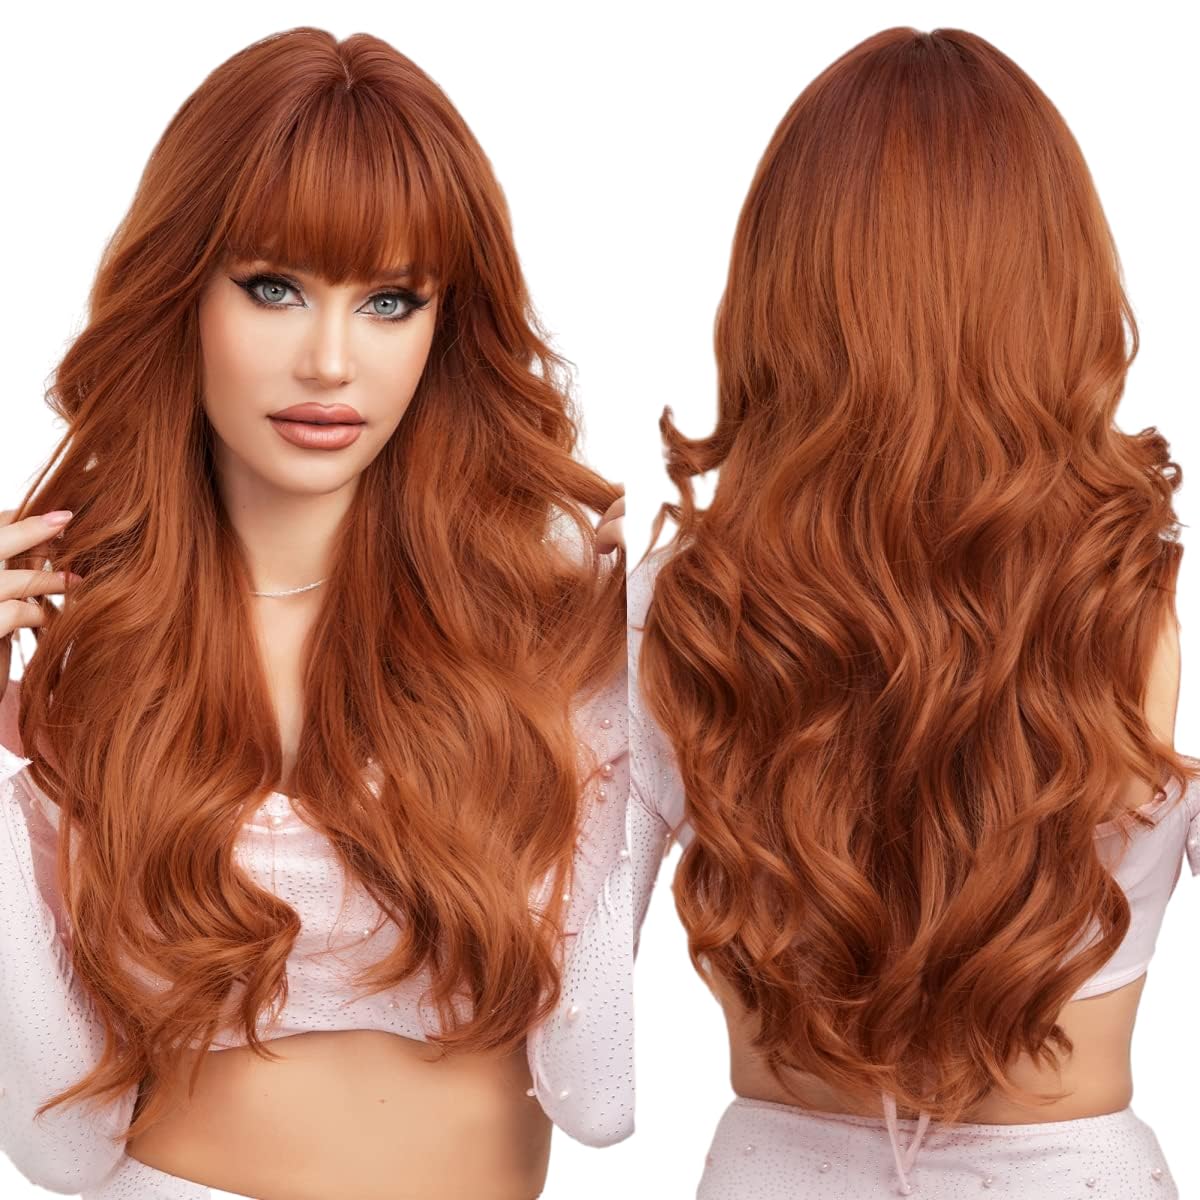 Black Wigs for Women Long Curly Wigs With Bangs Water Wavy Synthetic Wig, Party Cosplay Daily Use